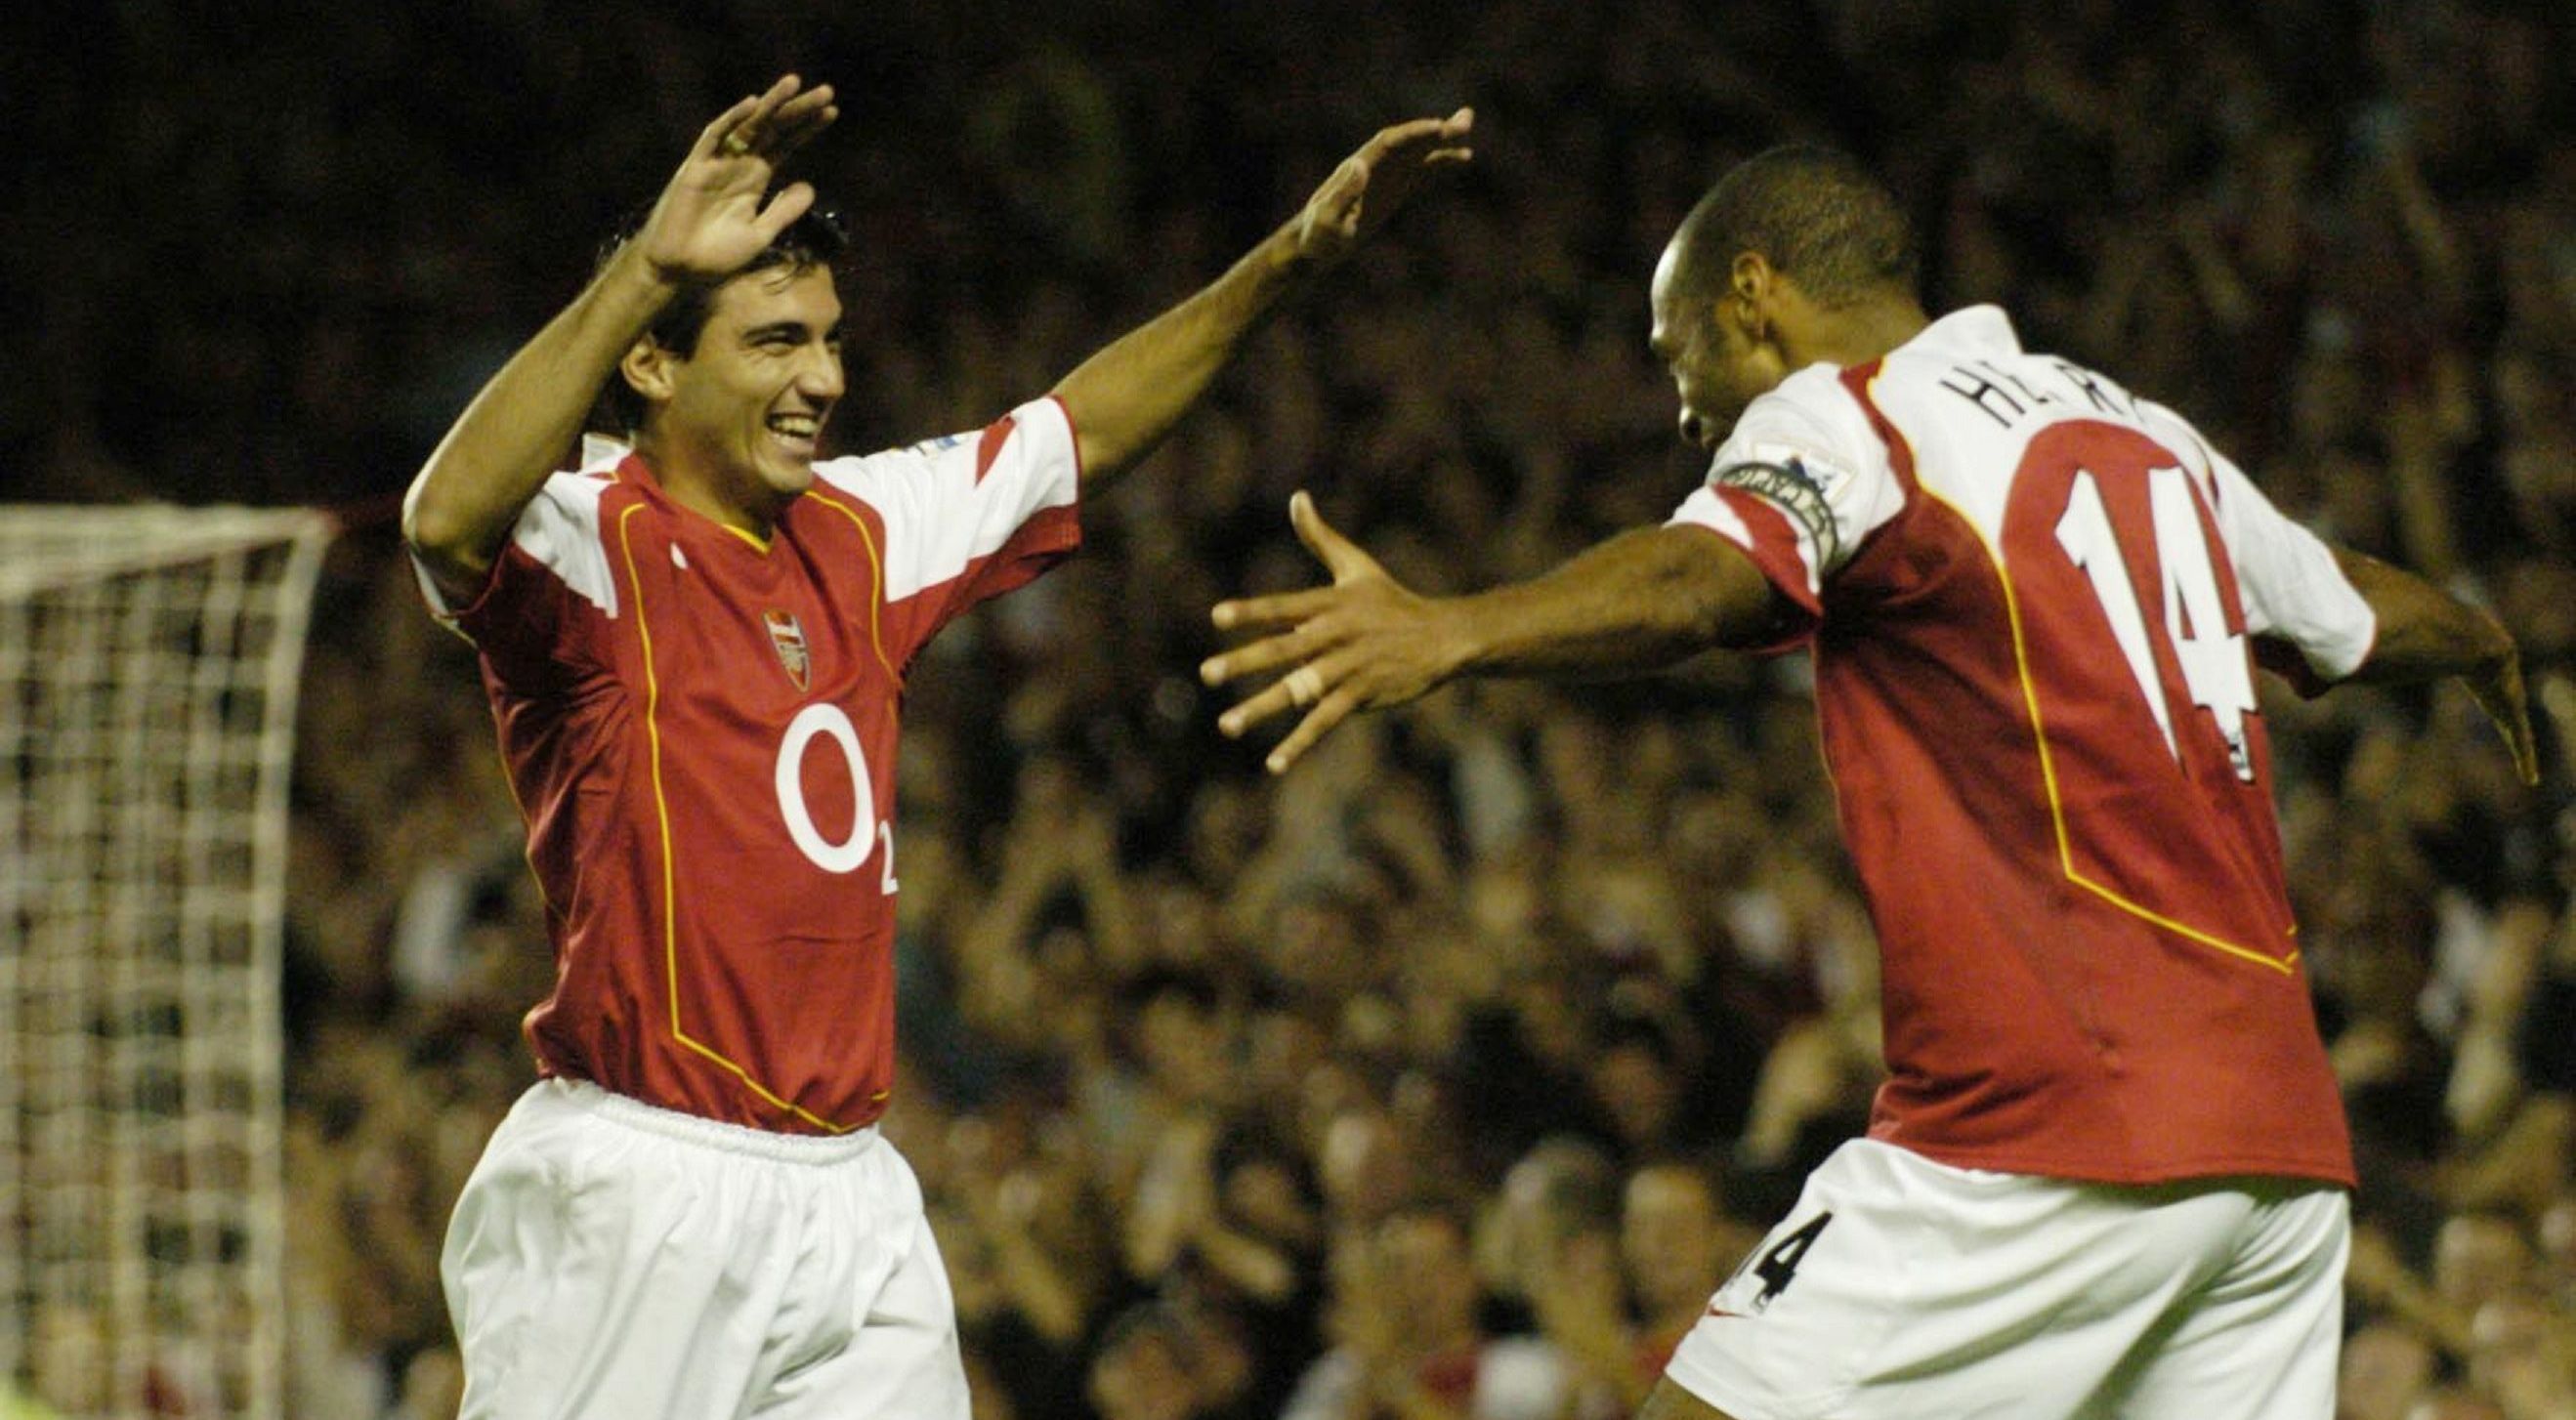 Thierry Henry pays tribute to 'exceptional human being' Reyes on